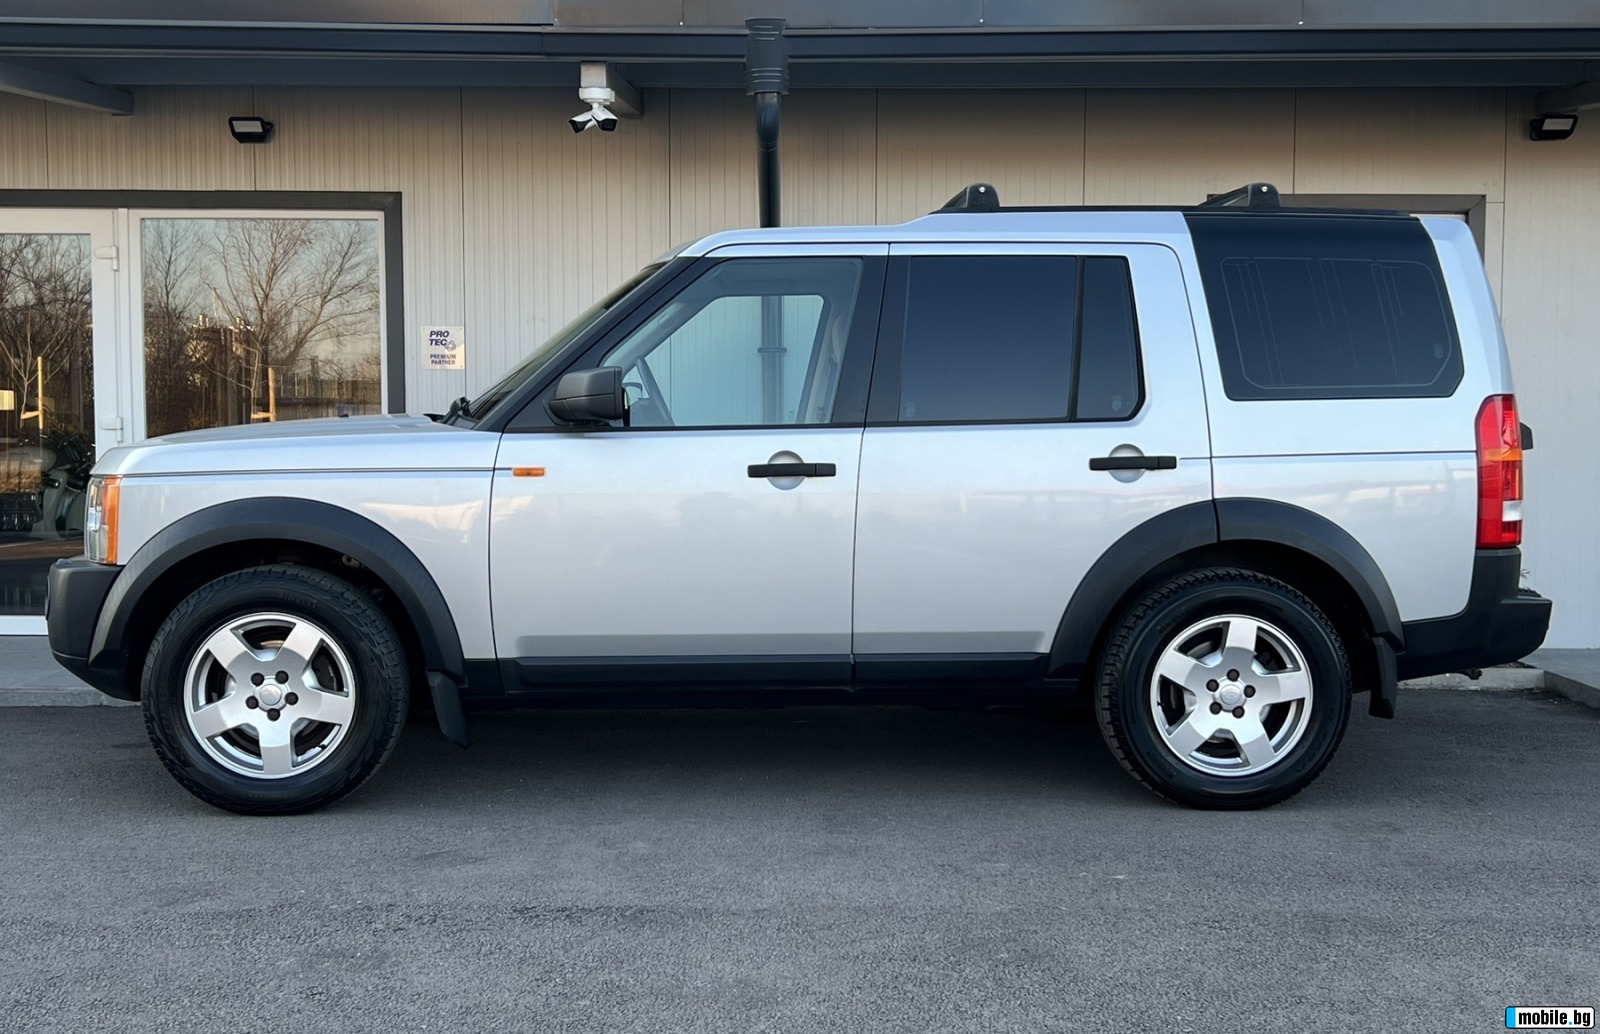 Land Rover Discovery Discovery3 2.7. 7  | Mobile.bg   4